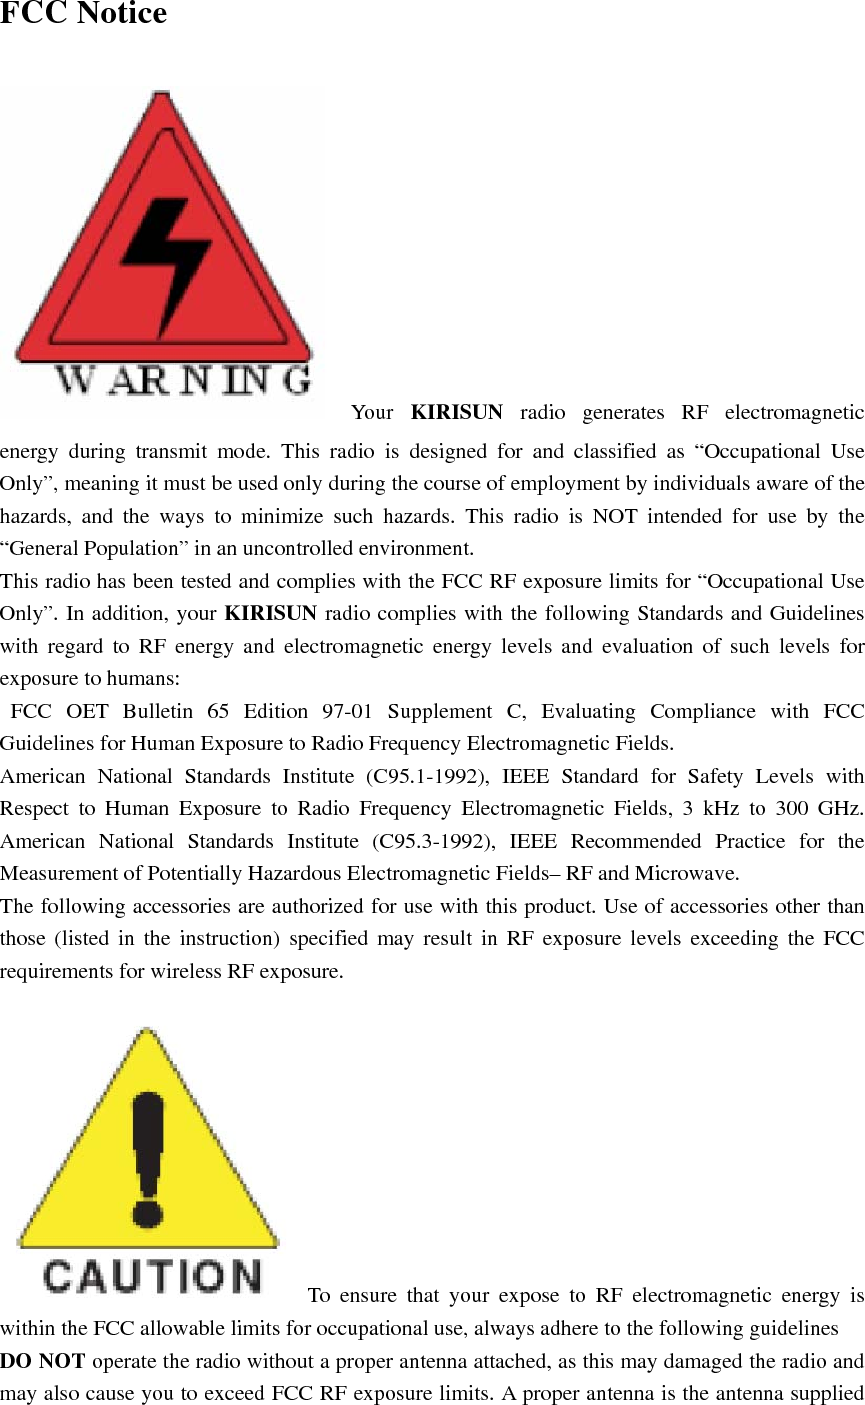 FCC Notice  Your  KIRISUN radio generates RF electromagnetic energy during transmit mode. This radio is designed for and classified as “Occupational Use Only”, meaning it must be used only during the course of employment by individuals aware of the hazards, and the ways to minimize such hazards. This radio is NOT intended for use by the “General Population” in an uncontrolled environment. This radio has been tested and complies with the FCC RF exposure limits for “Occupational Use Only”. In addition, your KIRISUN radio complies with the following Standards and Guidelines with regard to RF energy and electromagnetic energy levels and evaluation of such levels for exposure to humans:  FCC OET Bulletin 65 Edition 97-01 Supplement C, Evaluating Compliance with FCC Guidelines for Human Exposure to Radio Frequency Electromagnetic Fields.     American National Standards Institute (C95.1-1992), IEEE Standard for Safety Levels with Respect to Human Exposure to Radio Frequency Electromagnetic Fields, 3 kHz to 300 GHz.  American National Standards Institute (C95.3-1992), IEEE Recommended Practice for the Measurement of Potentially Hazardous Electromagnetic Fields– RF and Microwave.     The following accessories are authorized for use with this product. Use of accessories other than those (listed in the instruction) specified may result in RF exposure levels exceeding the FCC requirements for wireless RF exposure. To ensure that your expose to RF electromagnetic energy is within the FCC allowable limits for occupational use, always adhere to the following guidelines DO NOT operate the radio without a proper antenna attached, as this may damaged the radio and may also cause you to exceed FCC RF exposure limits. A proper antenna is the antenna supplied 